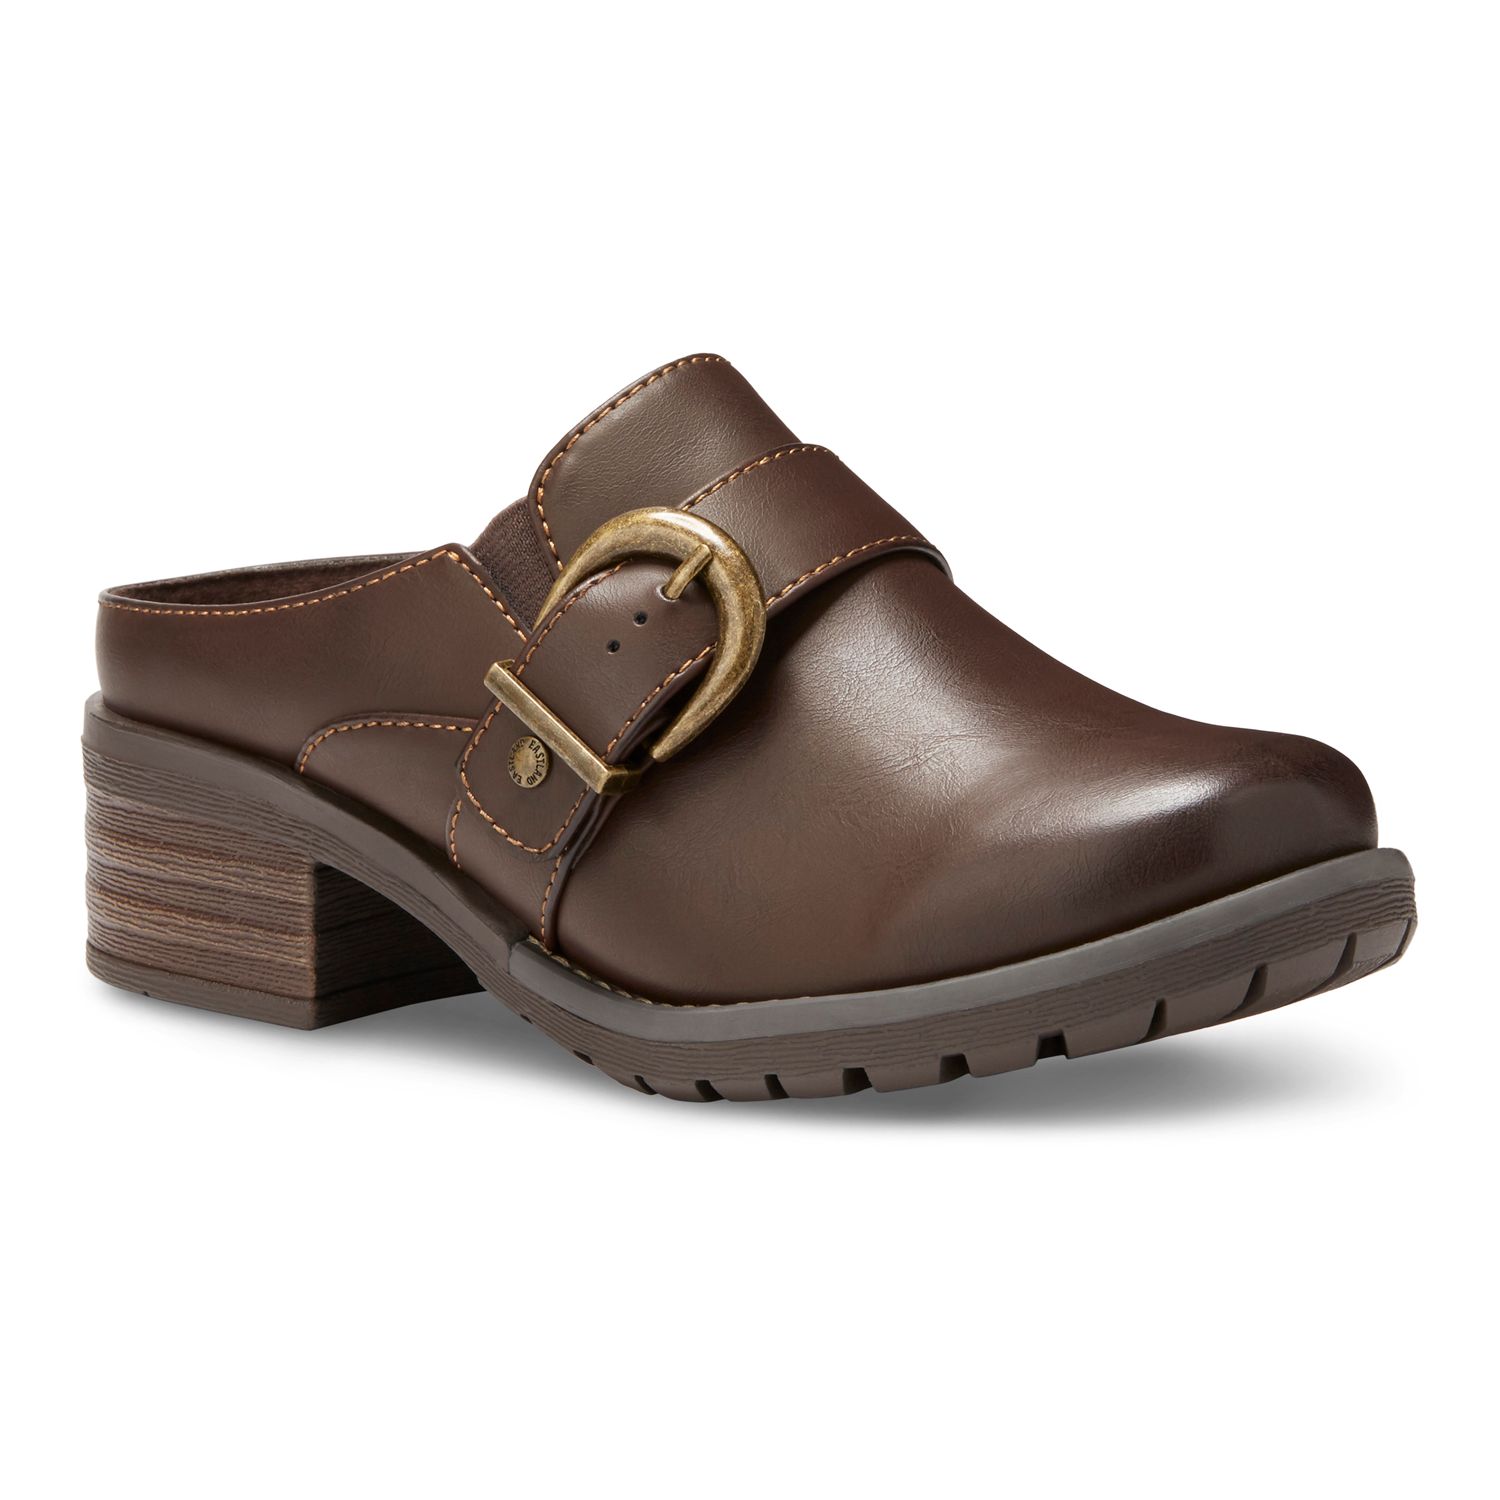 Image for Eastland Erin Women's Mule Clogs at Kohl's.